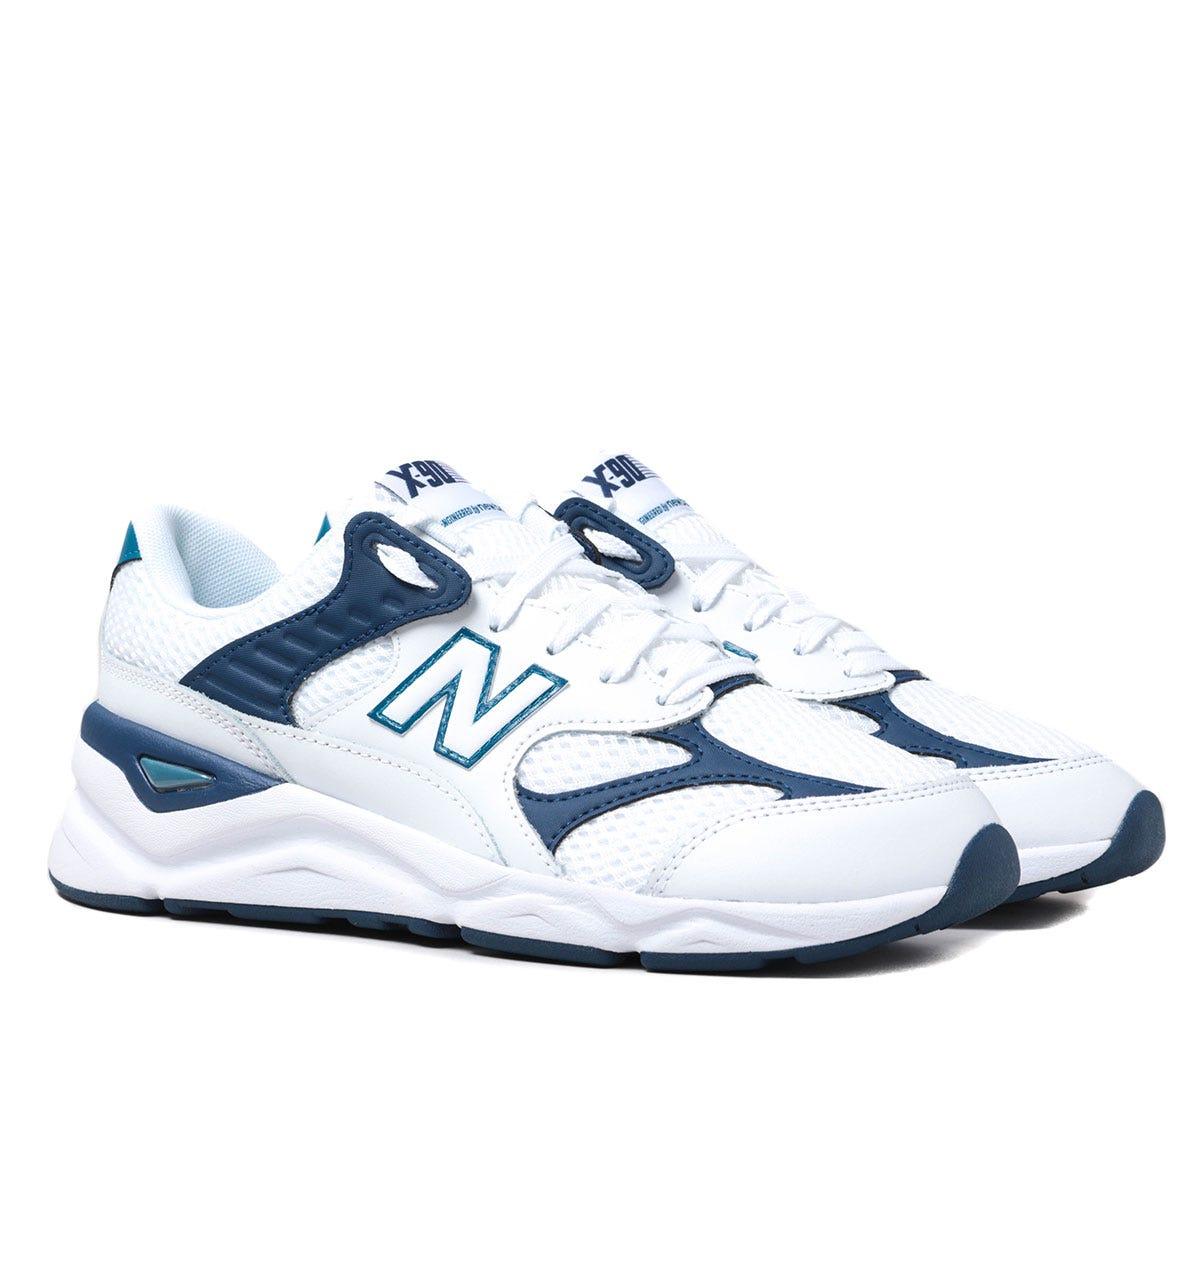 New Balance X-90 Navy White With Navy Detail Mesh Trainers for Men - Lyst